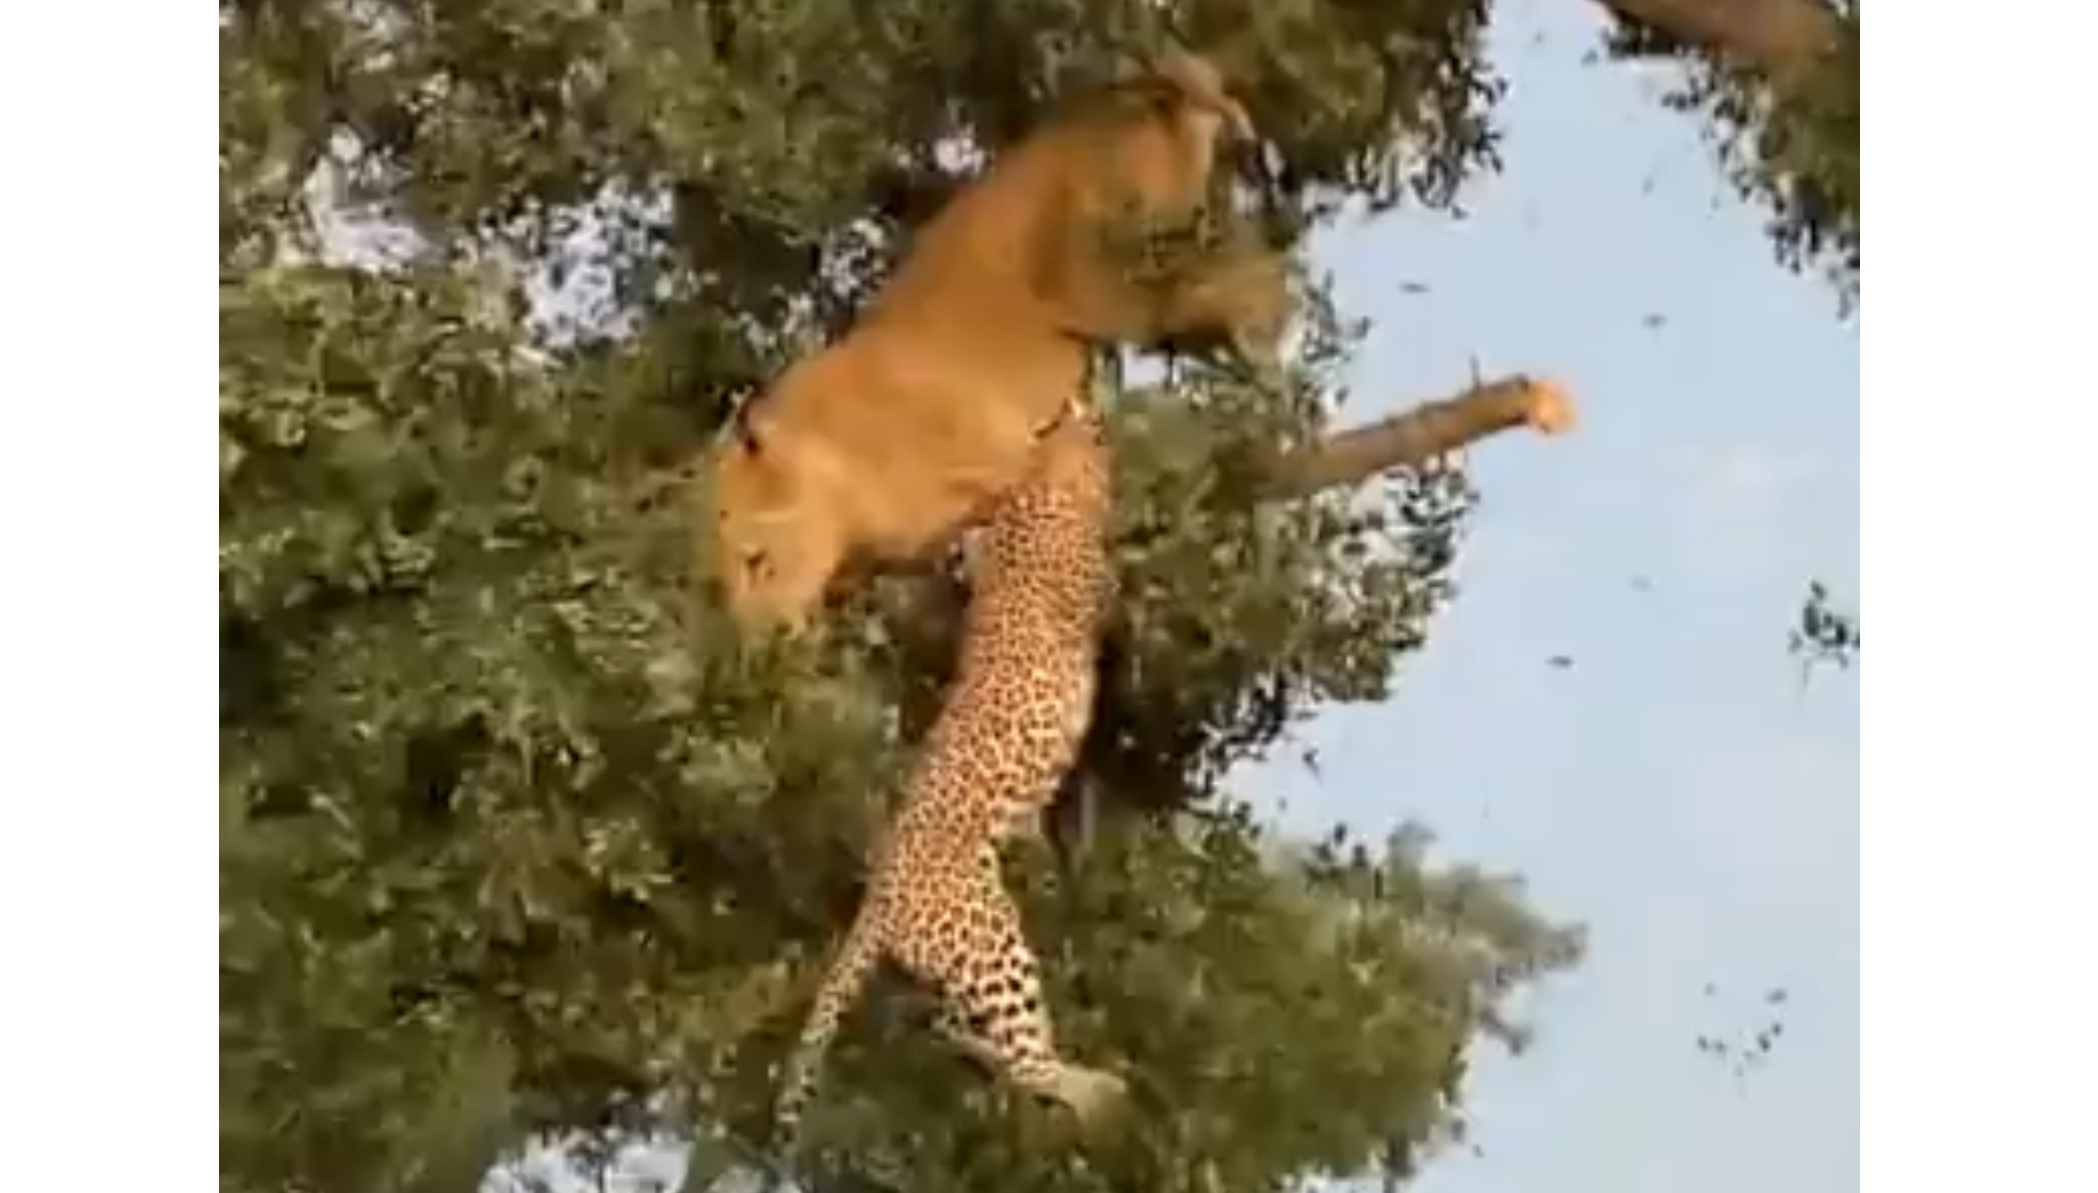 Leopard & Lion Fight For Food In The Tree